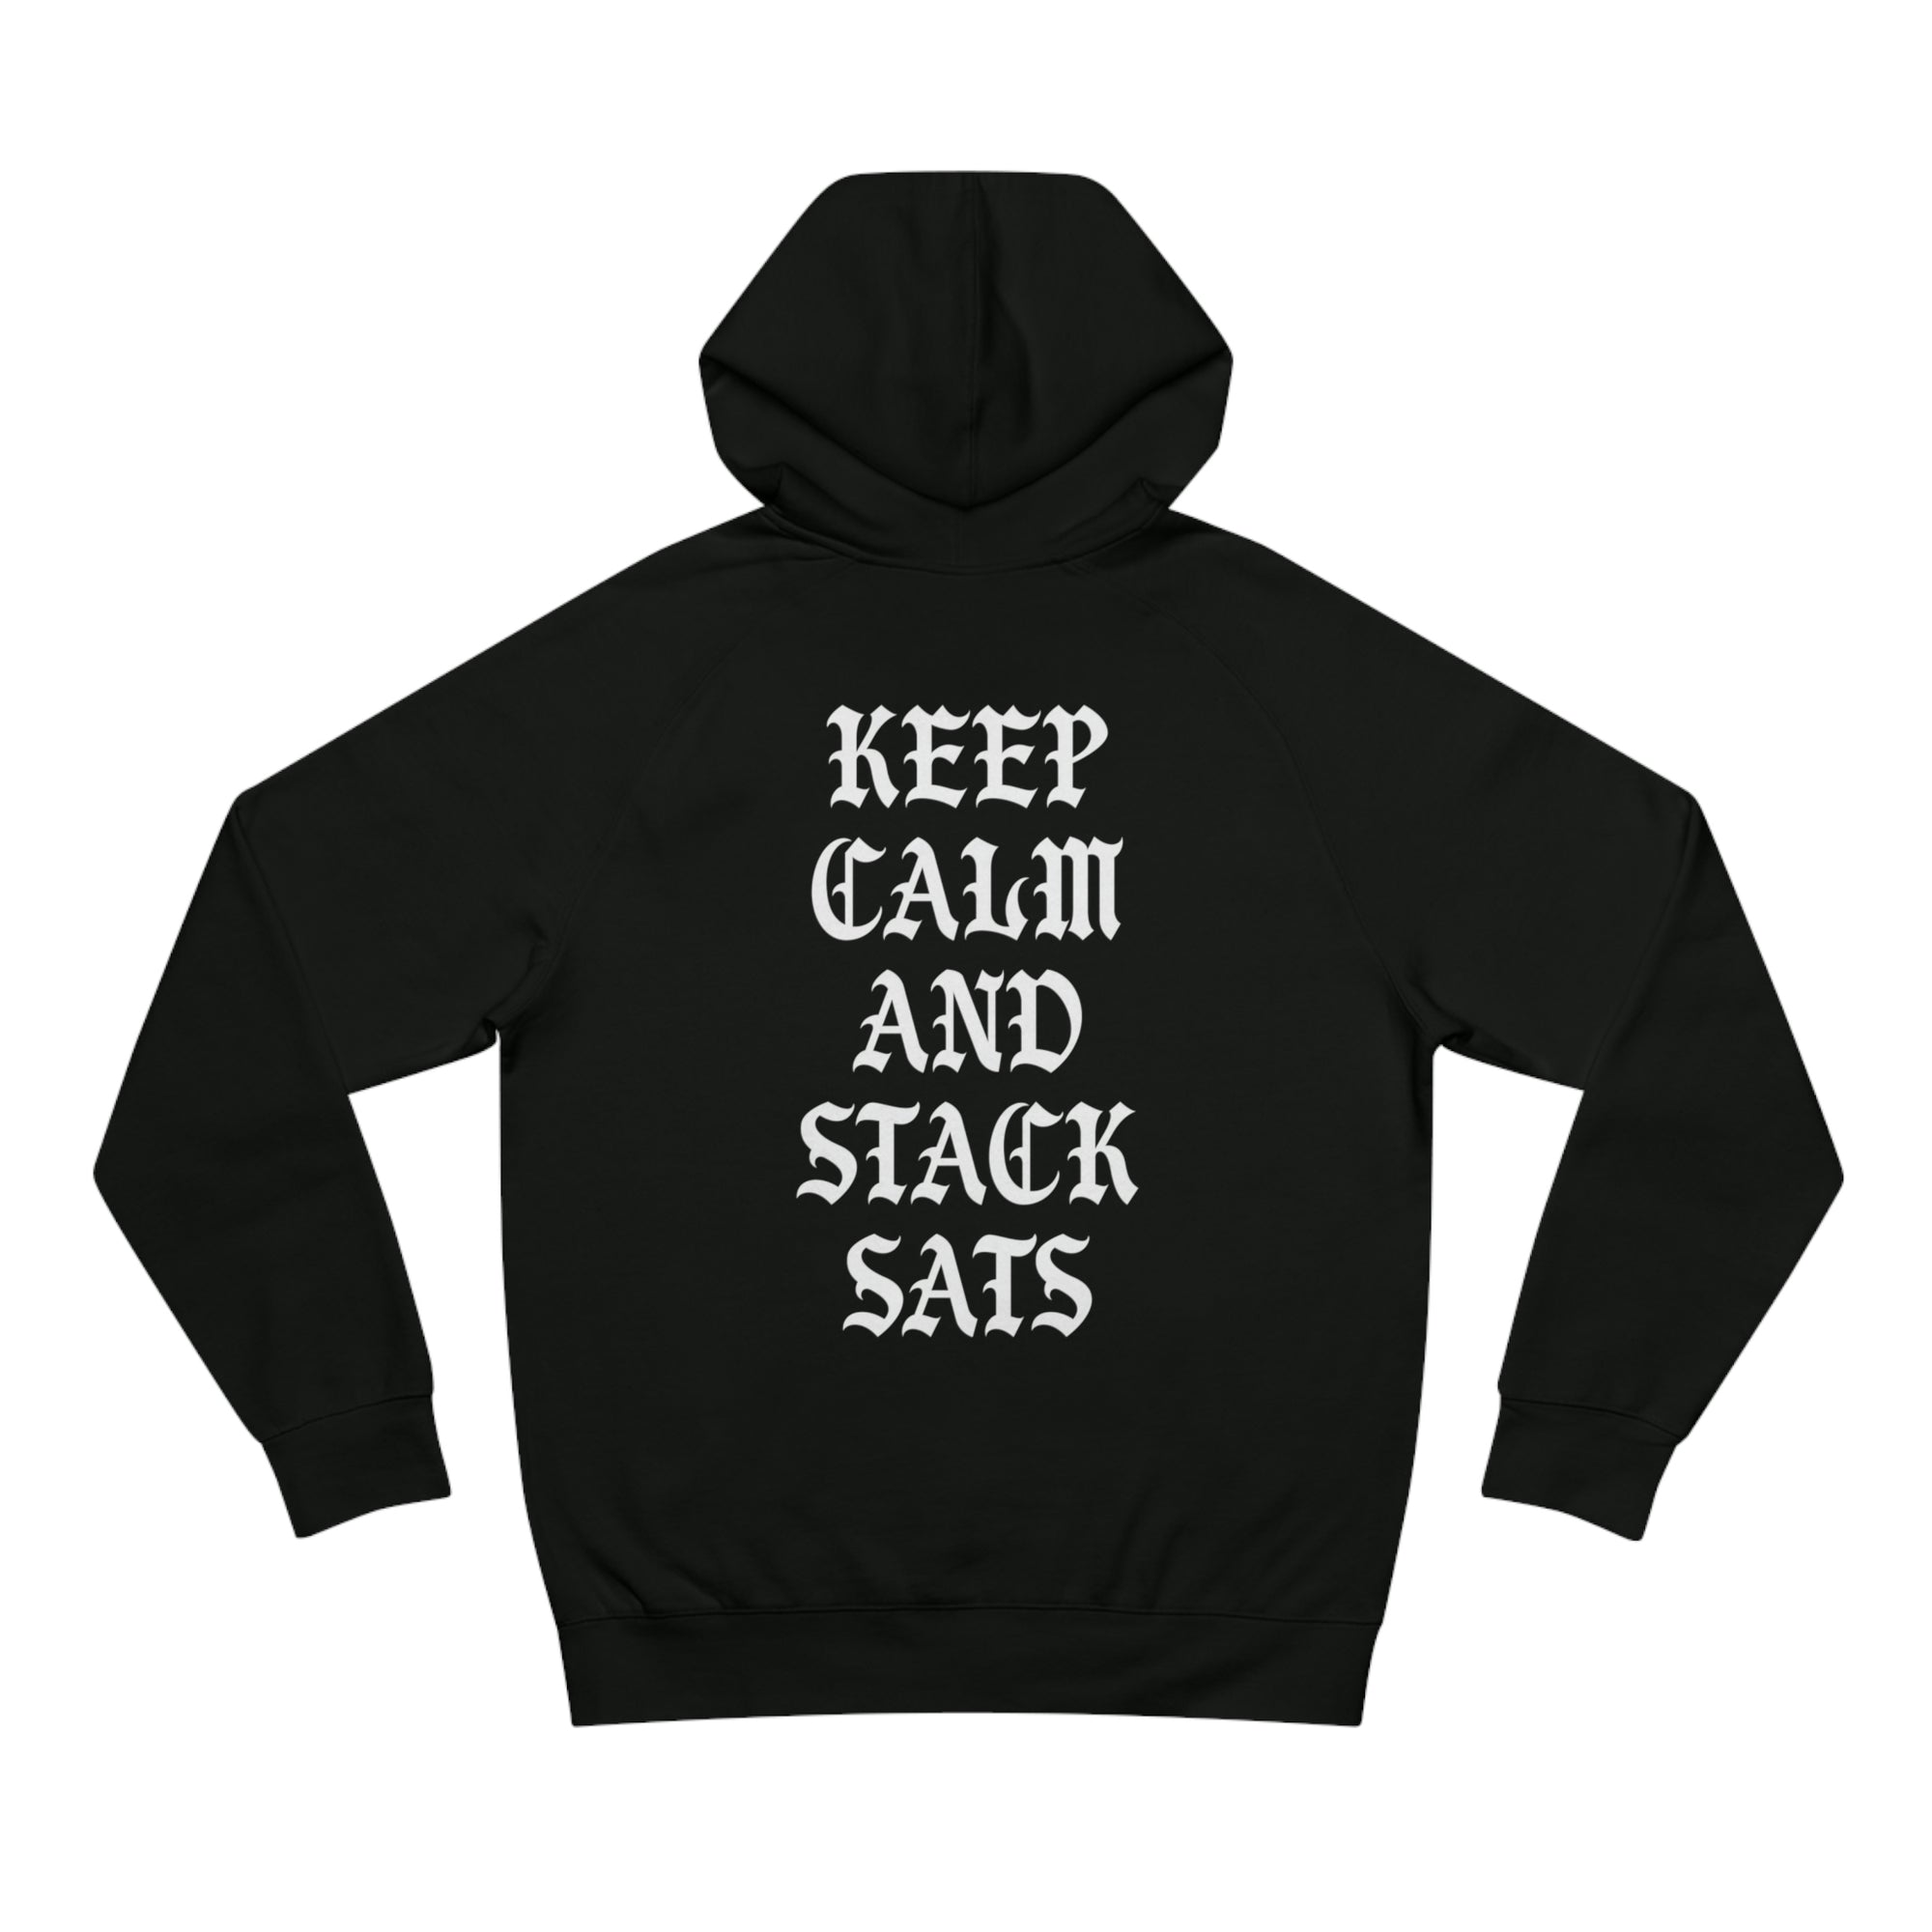 Bitcoin Hoodie - Keep Calm And Stack Sats Gothic Style Hoodie. Back view.